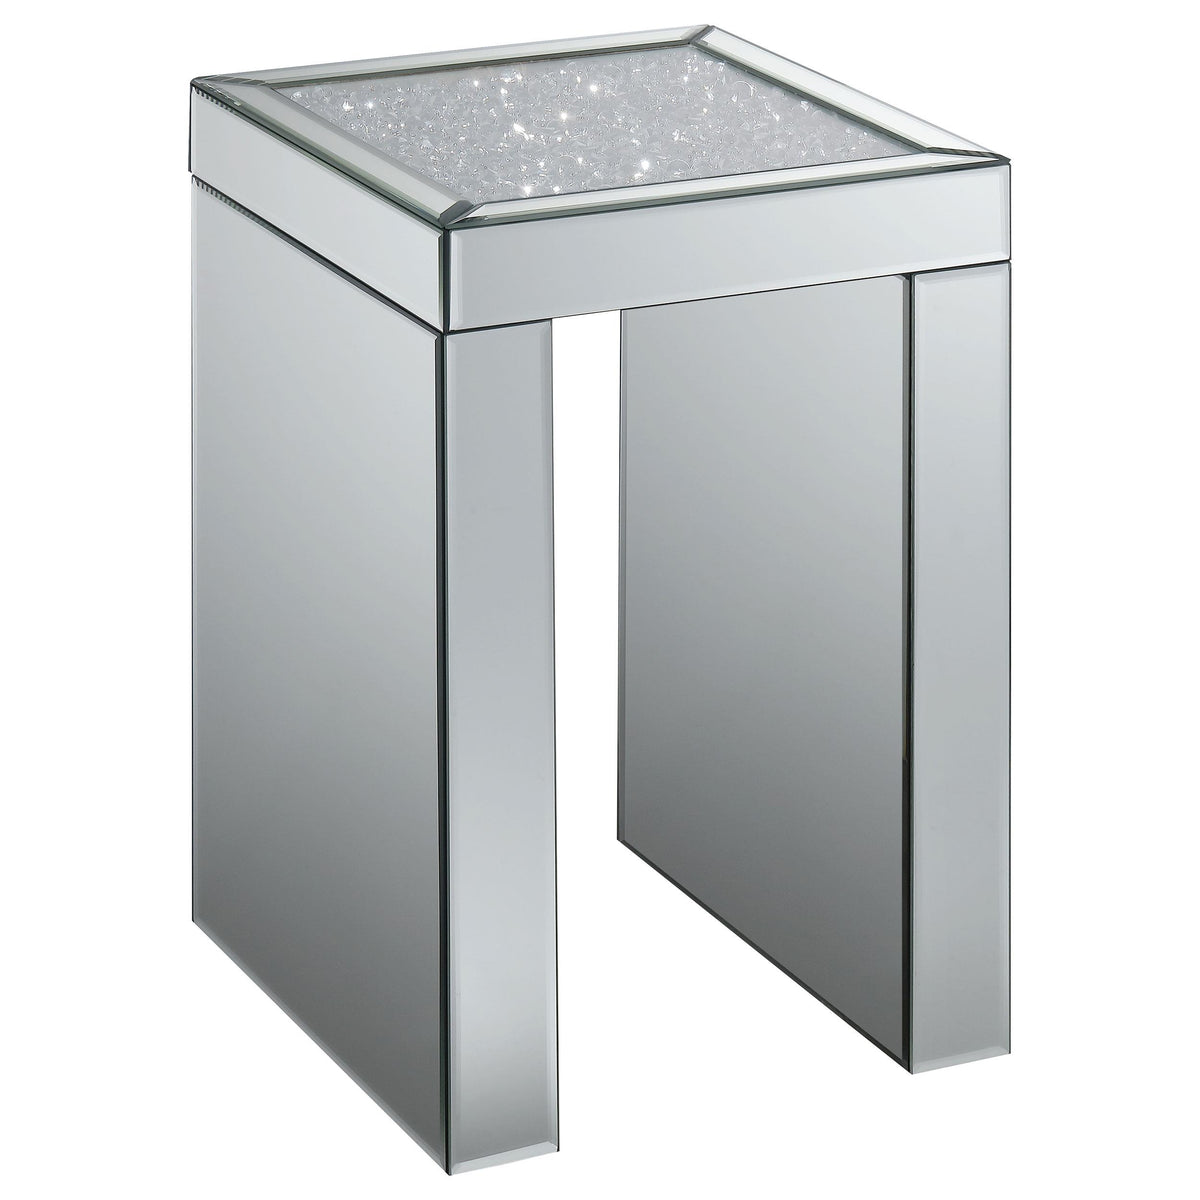 G930207 Contemporary Mirrored Side Table G930207 Contemporary Mirrored Side Table Half Price Furniture